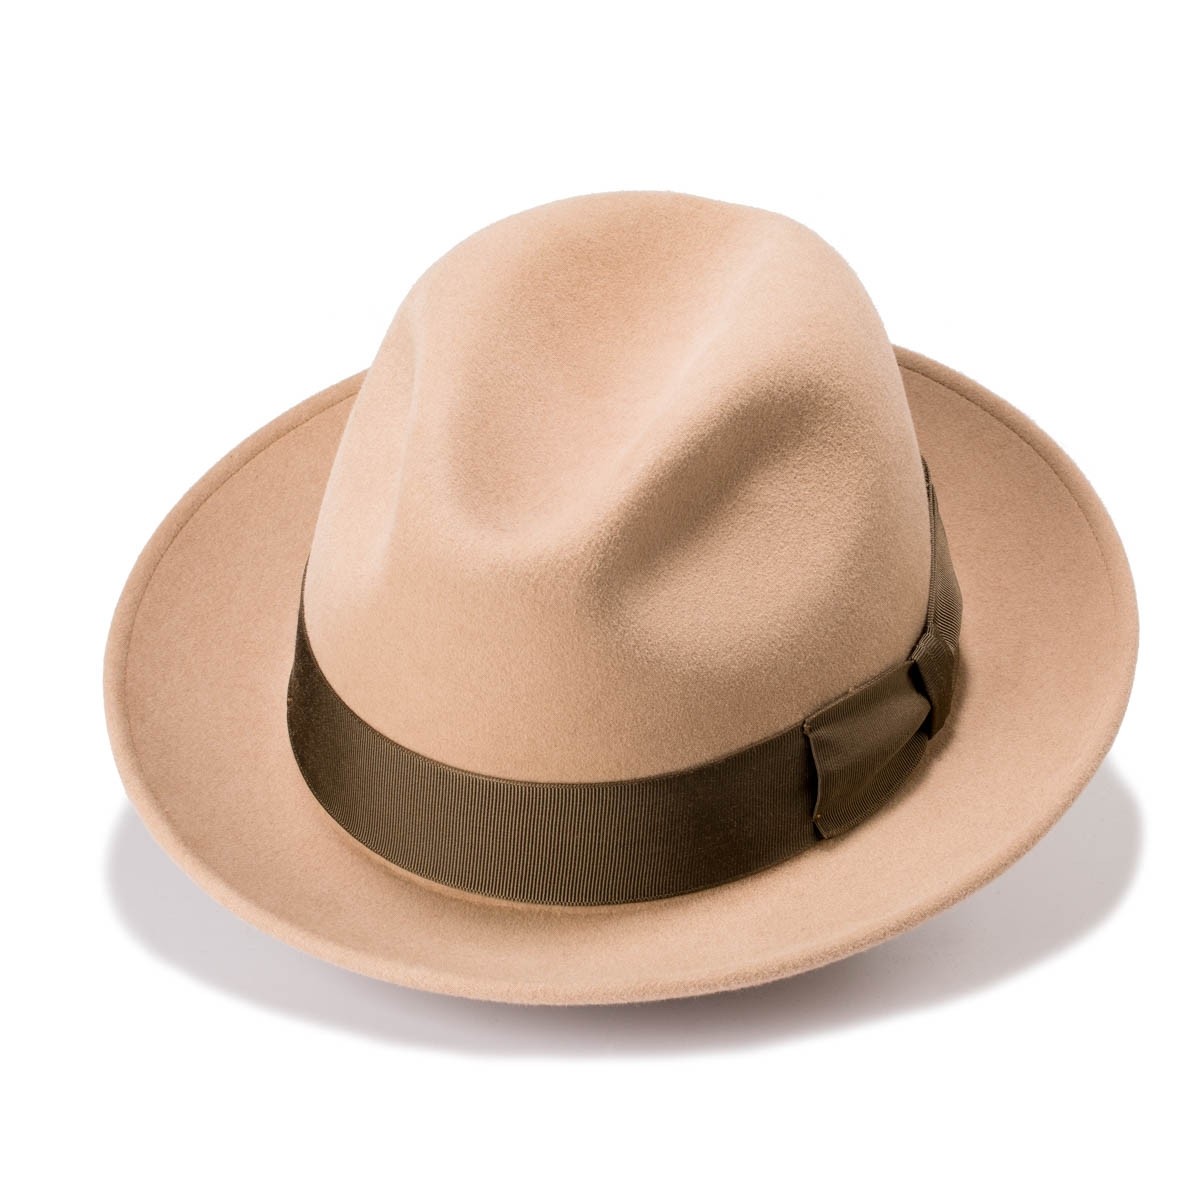 Efren Trilby style felt hat with a Otter color. Handmade in Spain. Fernandez y Roche